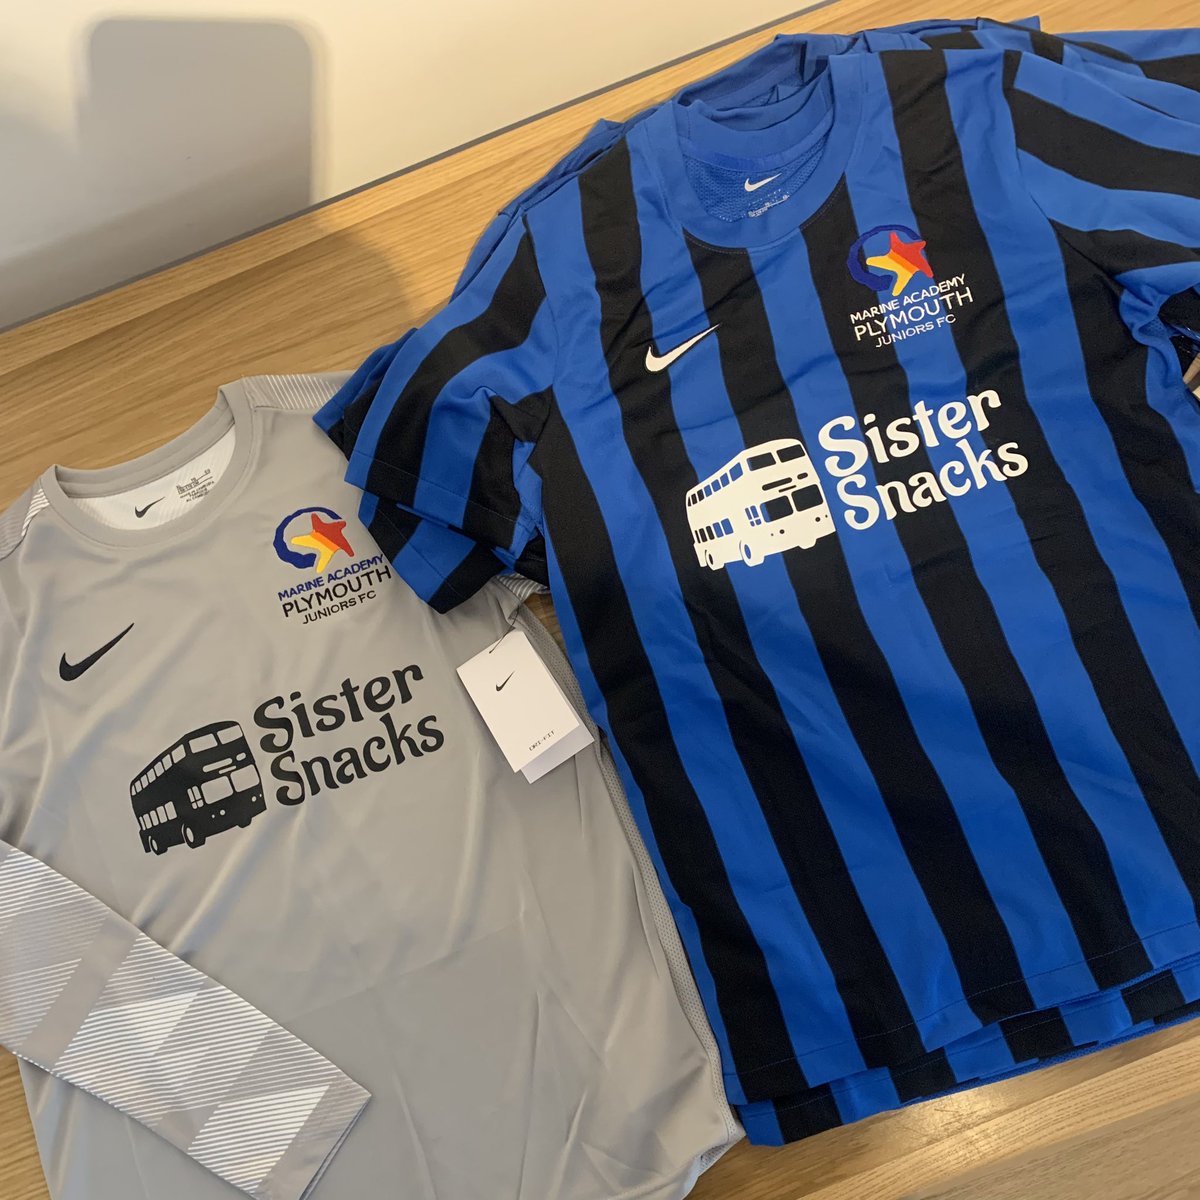 Our new home and away kit for this season 🔥🔥

We would like to say a massive thank you our sponsors @BDandCo and Sister Snacks for helping with the costs to purchase the kit 🙏🏻

Kit supplier : @DirectSoccer